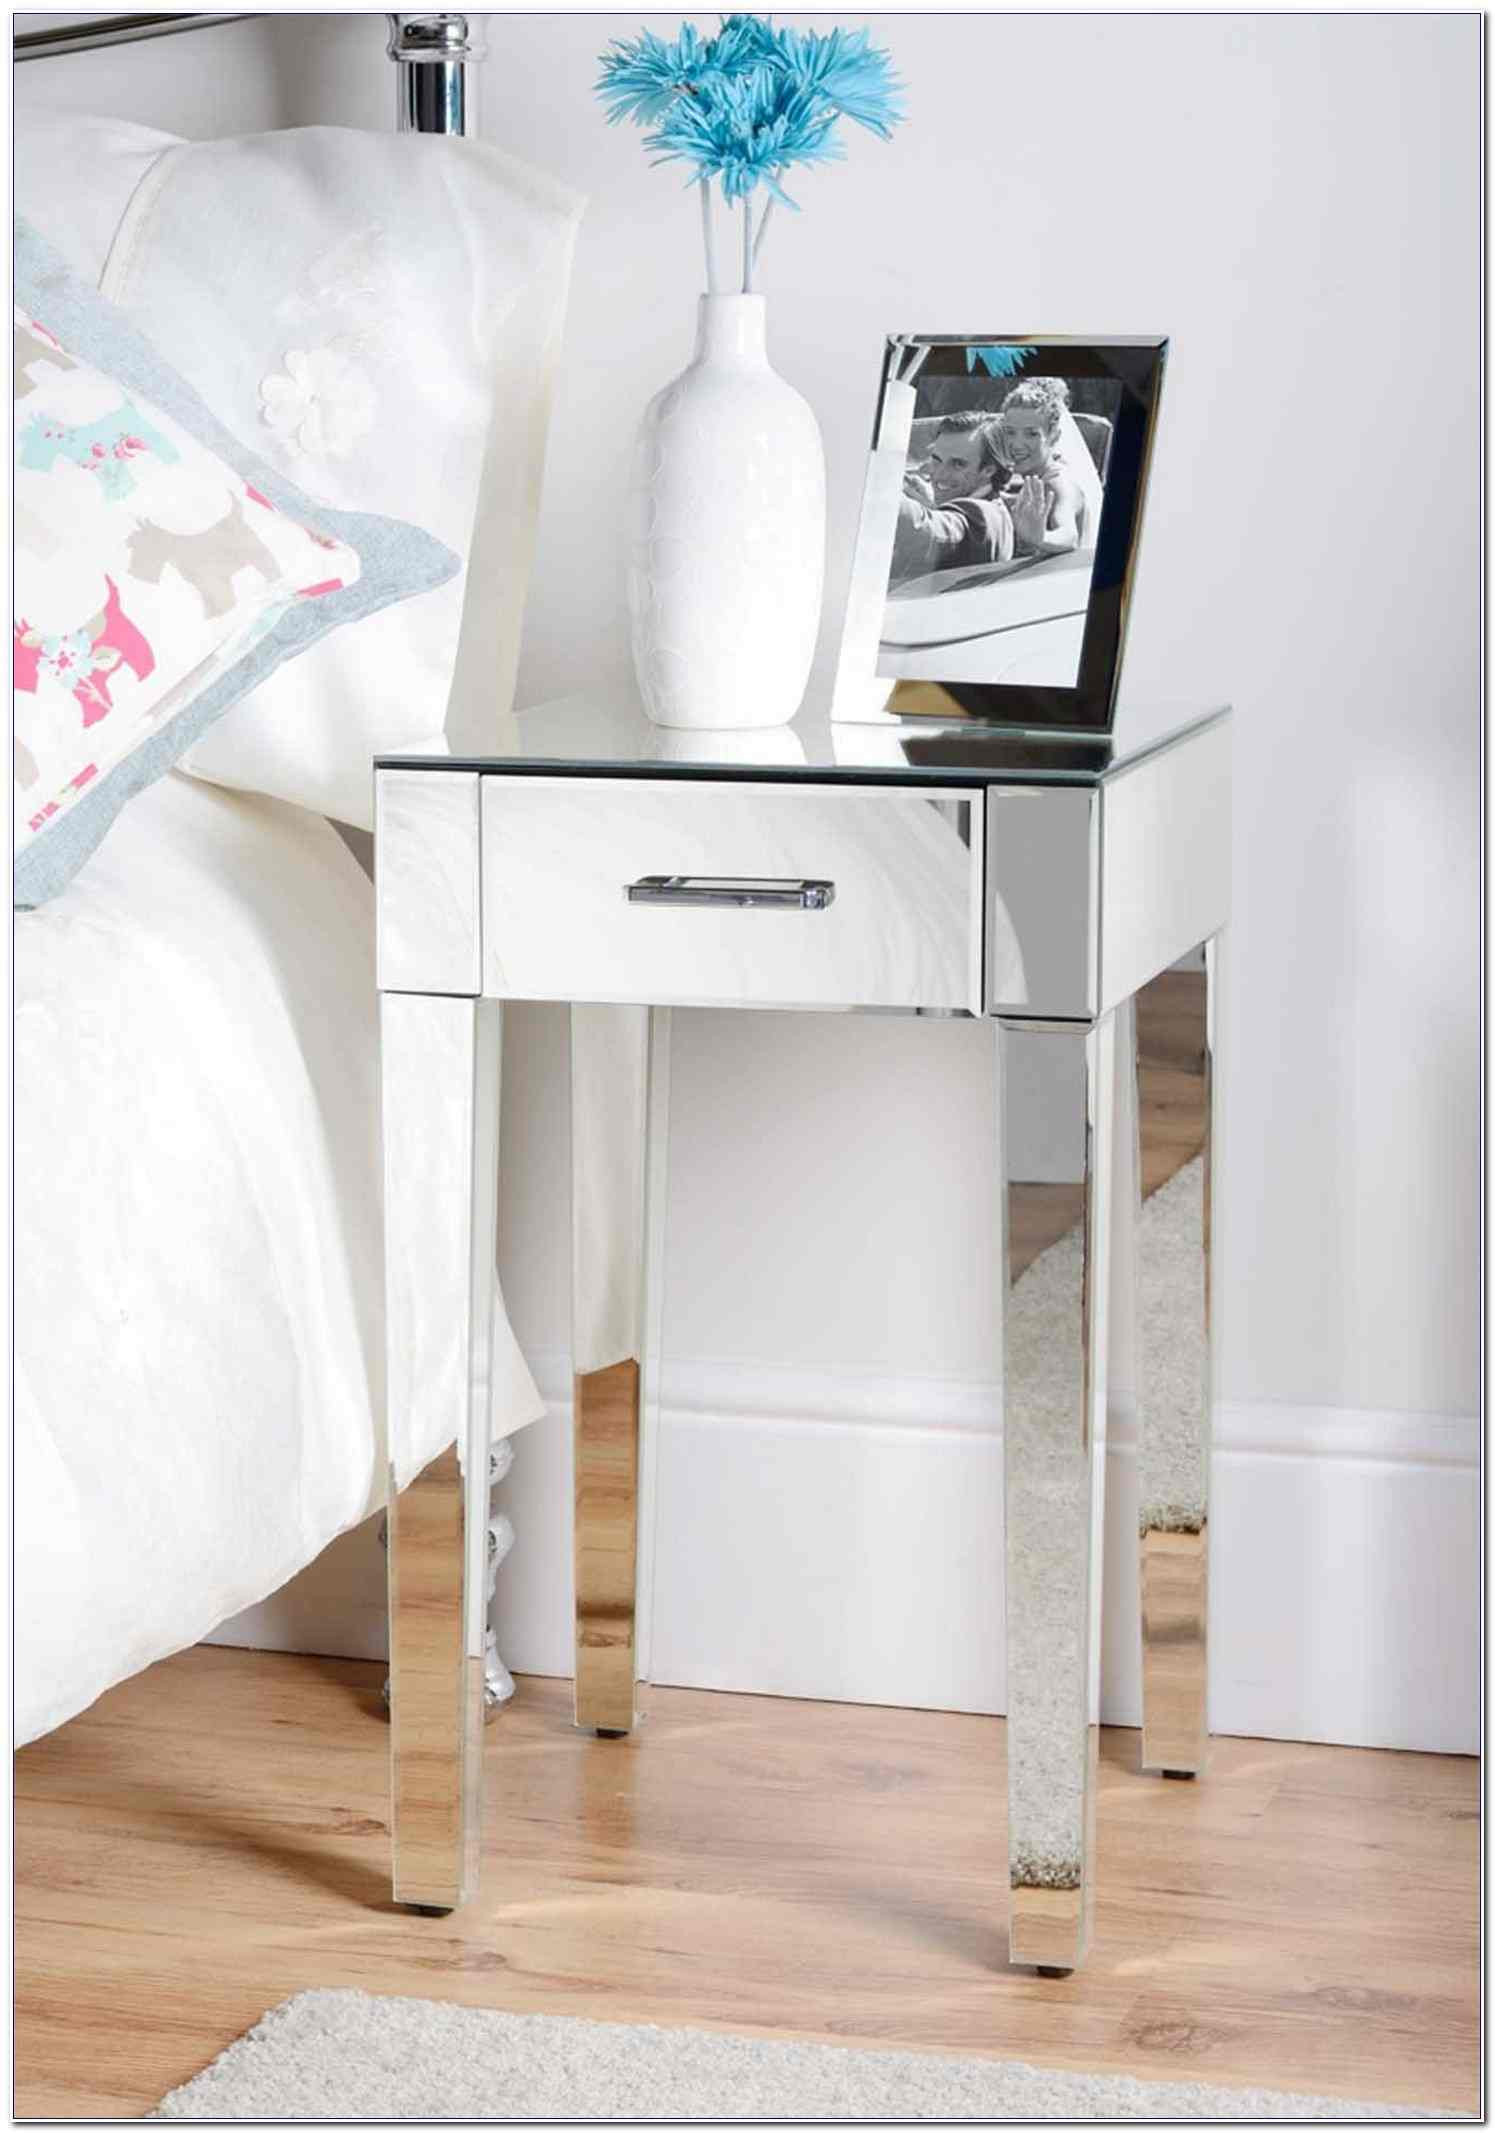 Small Bedroom End Tables
 Small End Table For Bedroom – Bedroom Ideas